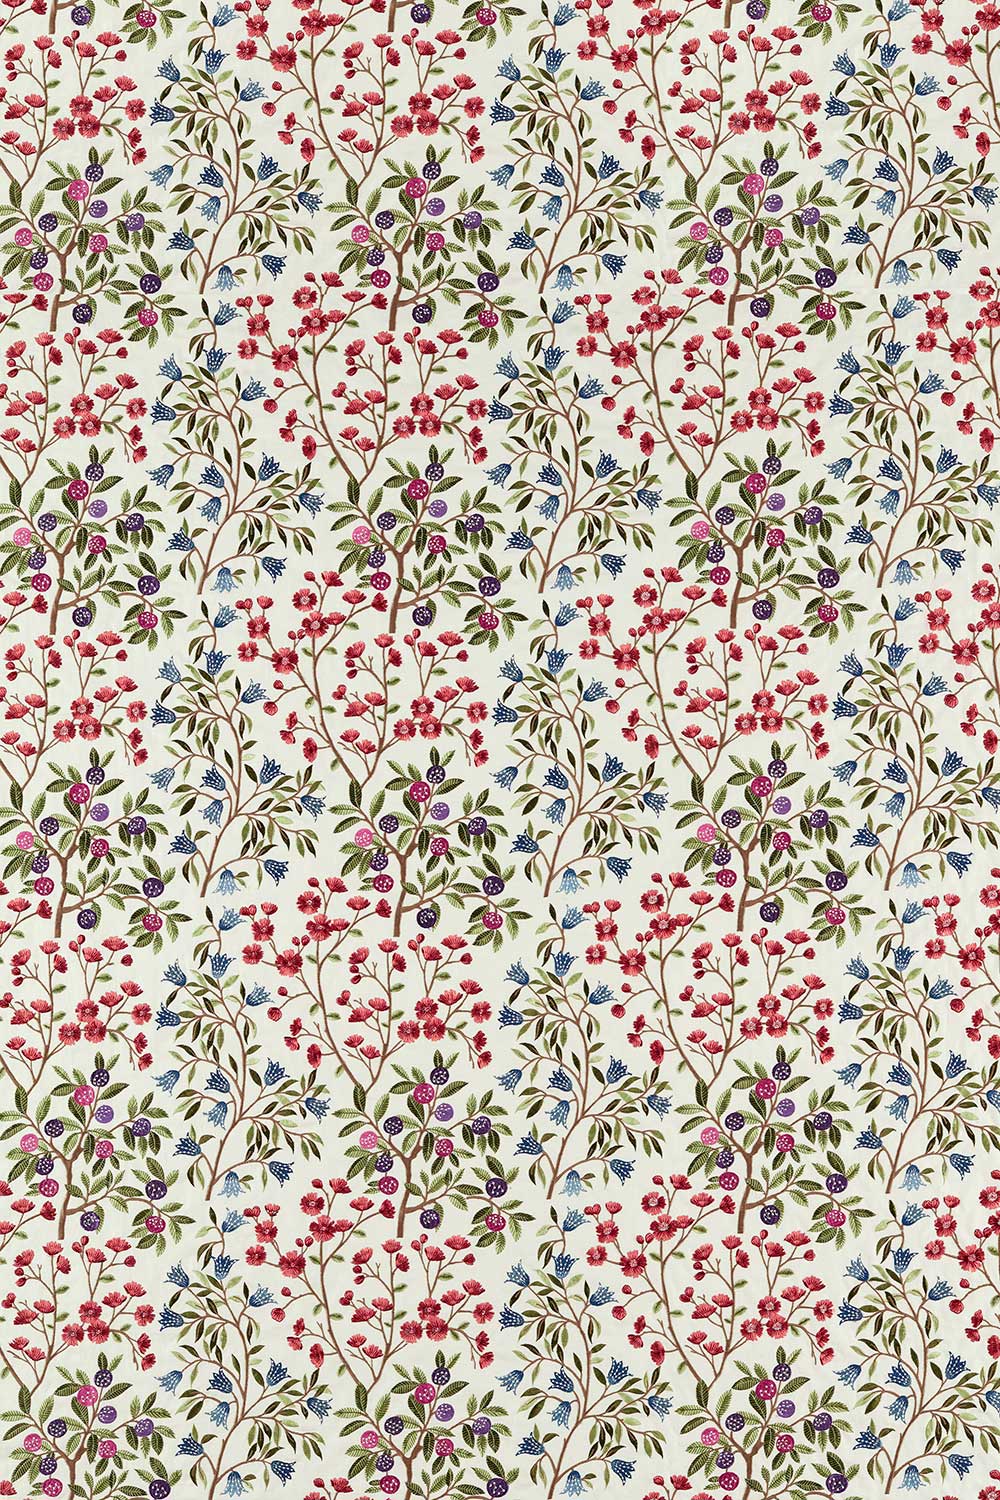 Foraging Fabric - Meadow / Violet - by Sanderson